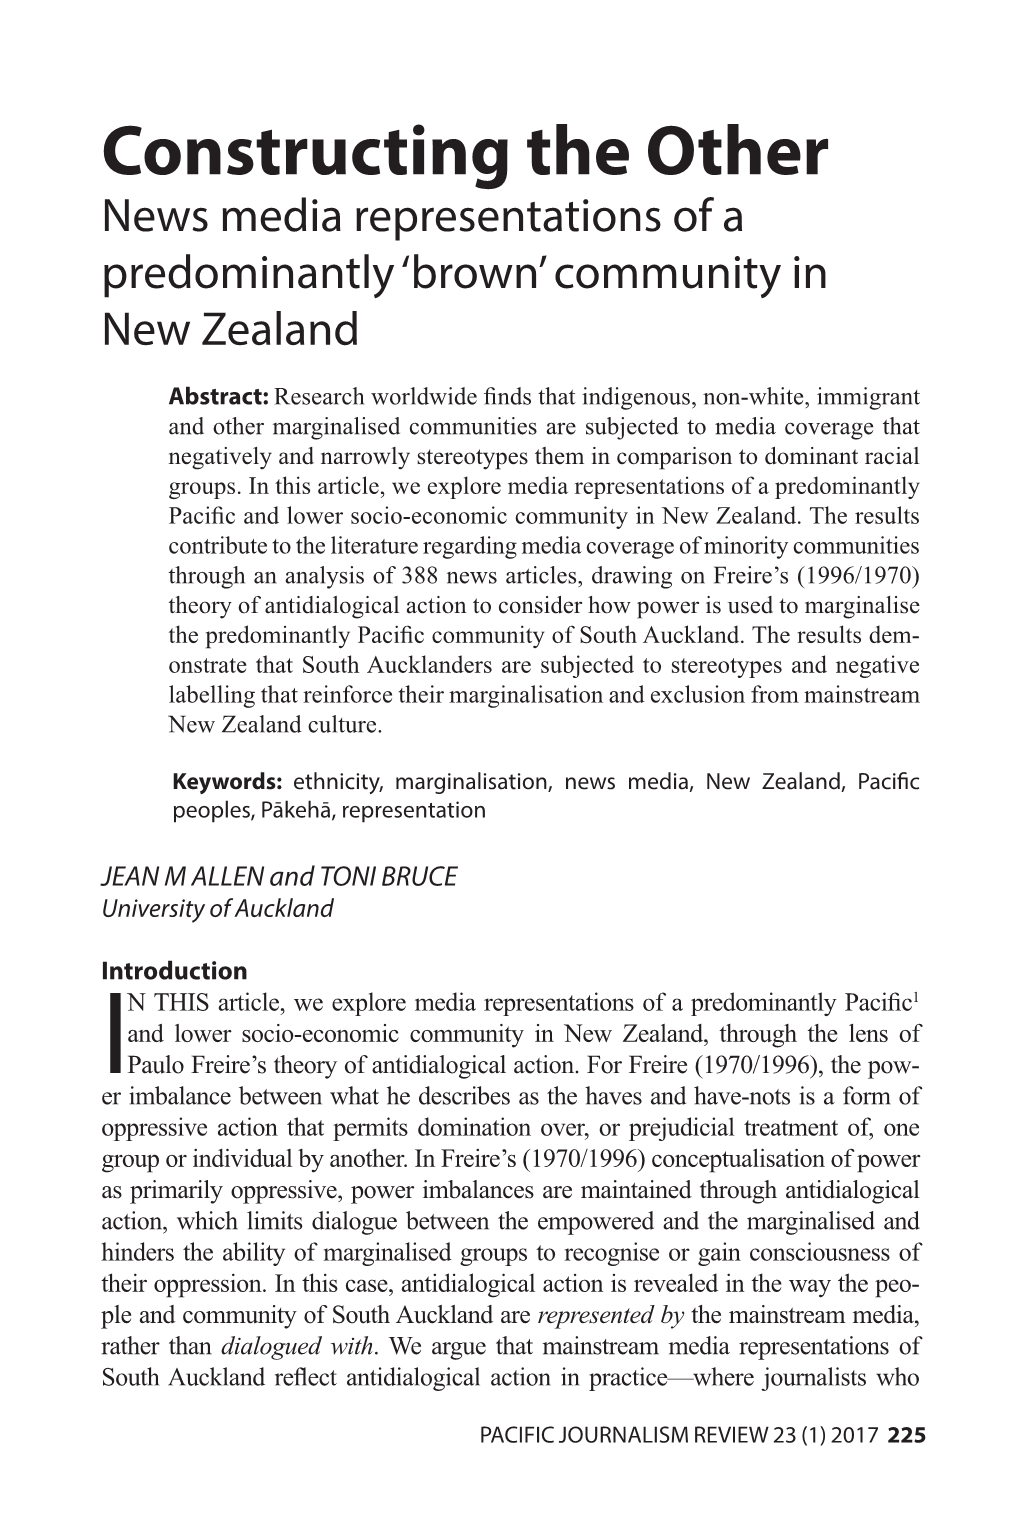 Constructing the Other News Media Representations of a Predominantly ‘Brown’ Community in New Zealand